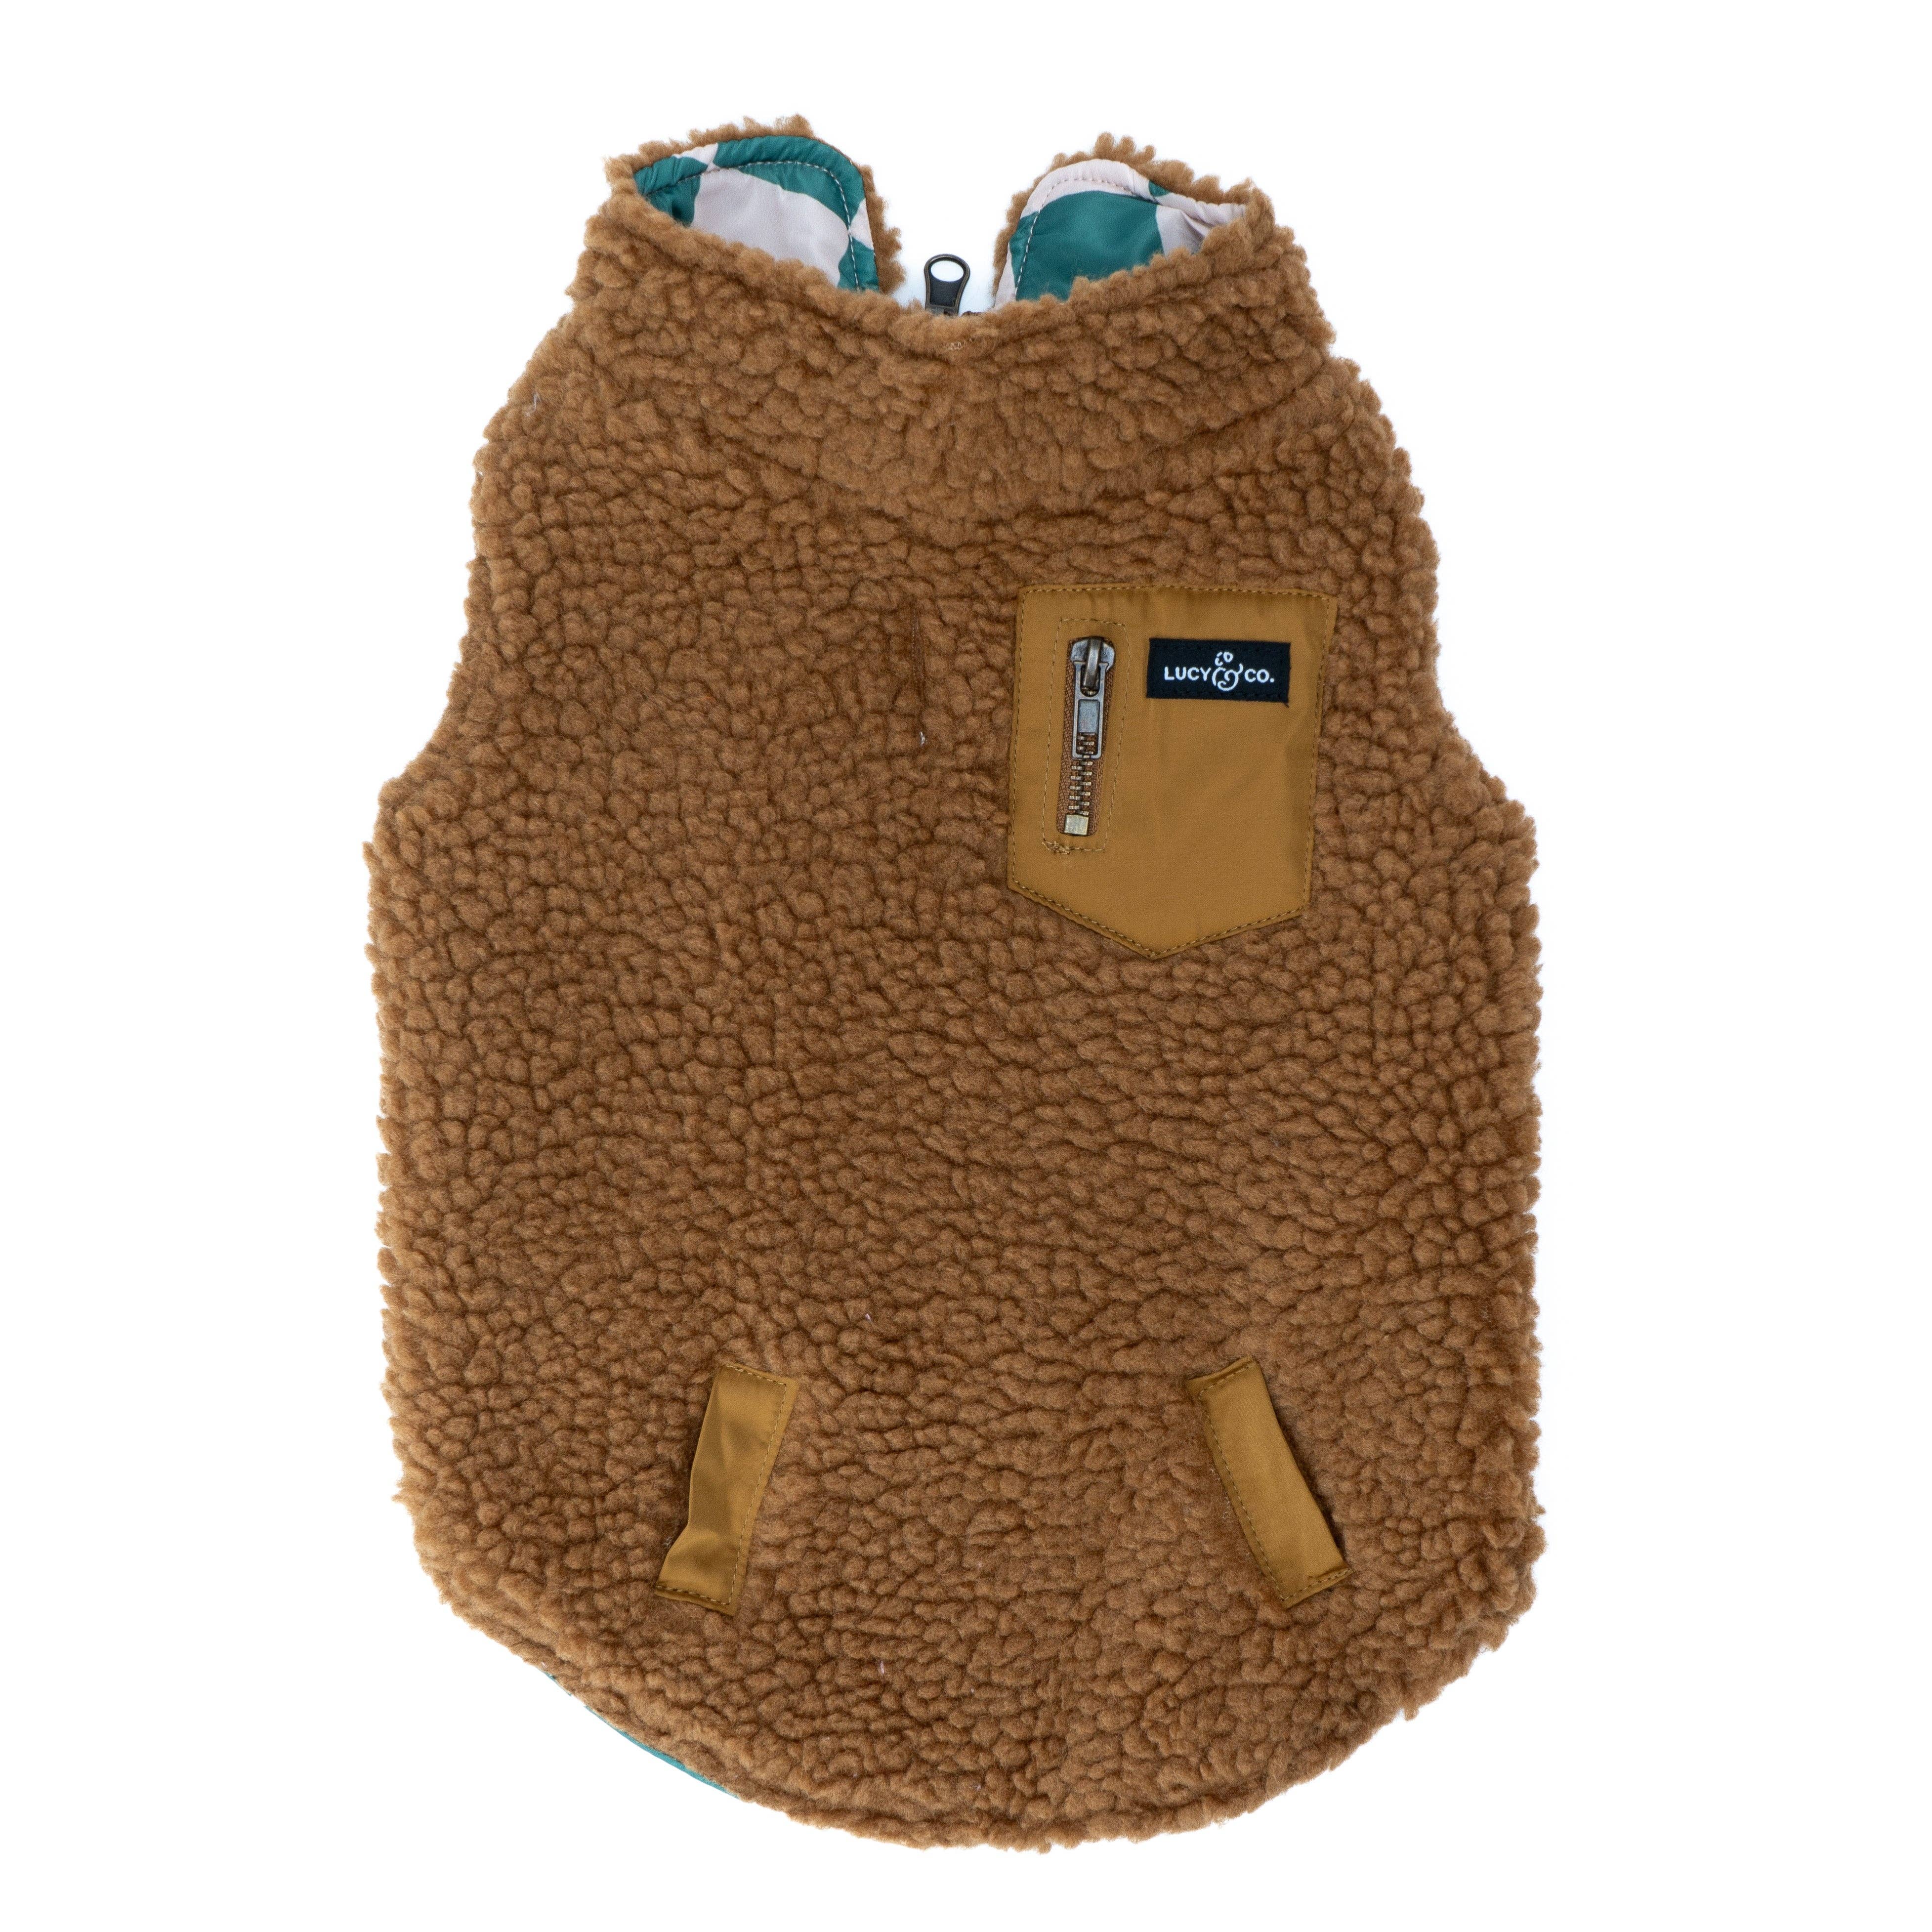 The You're a Square Reversible Teddy Vest: 2XL